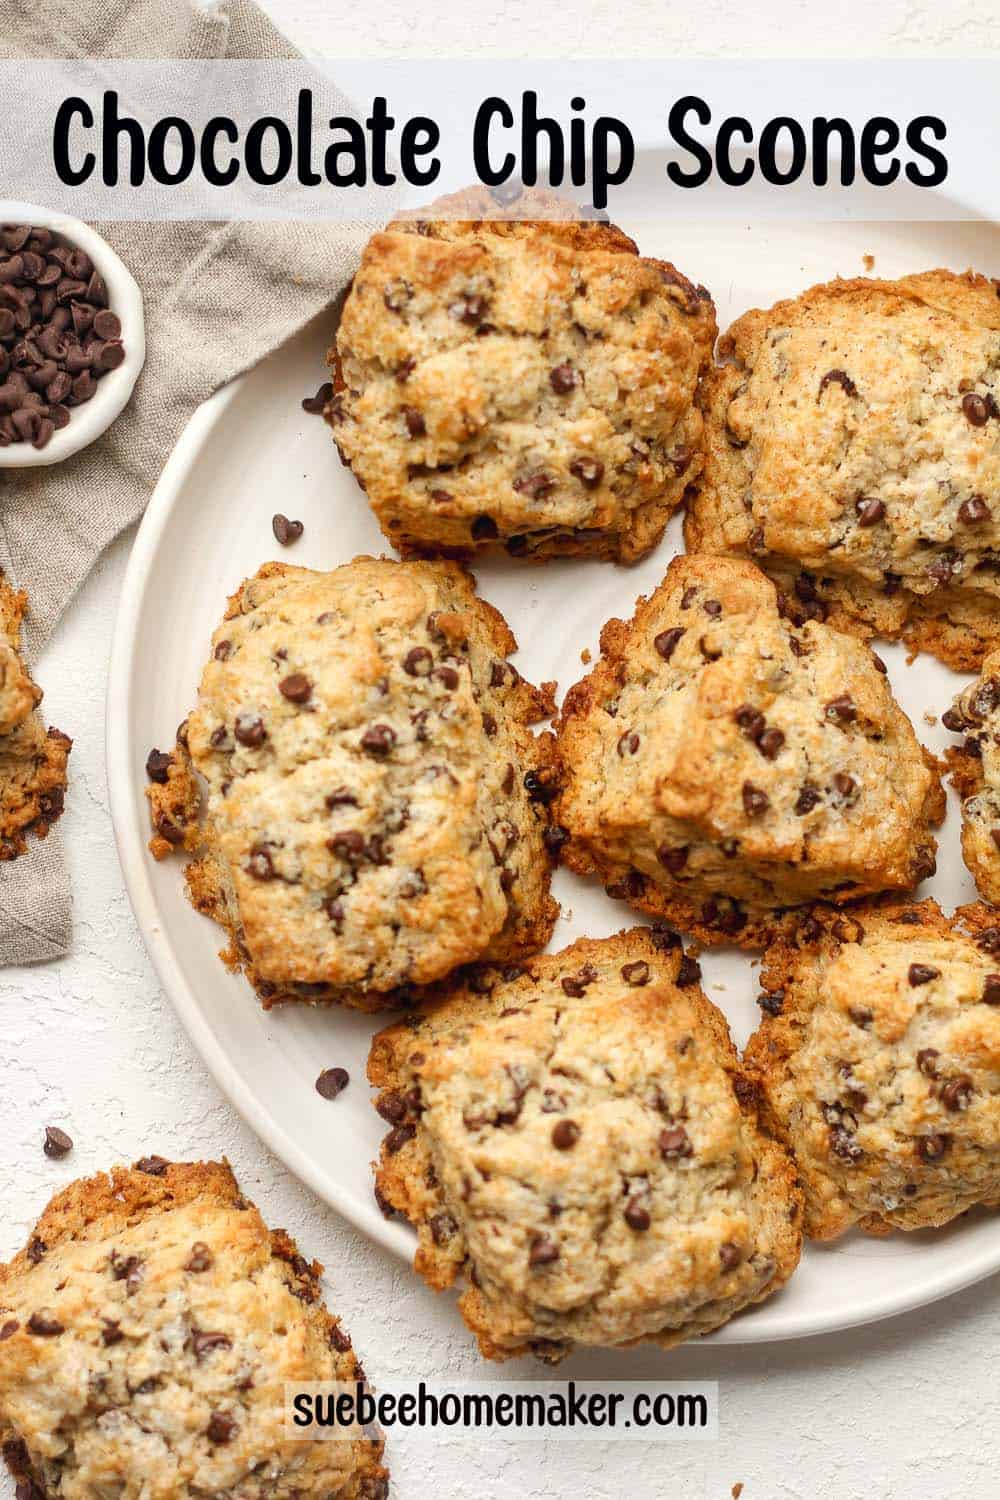 A large plate of chocolate chip scones.